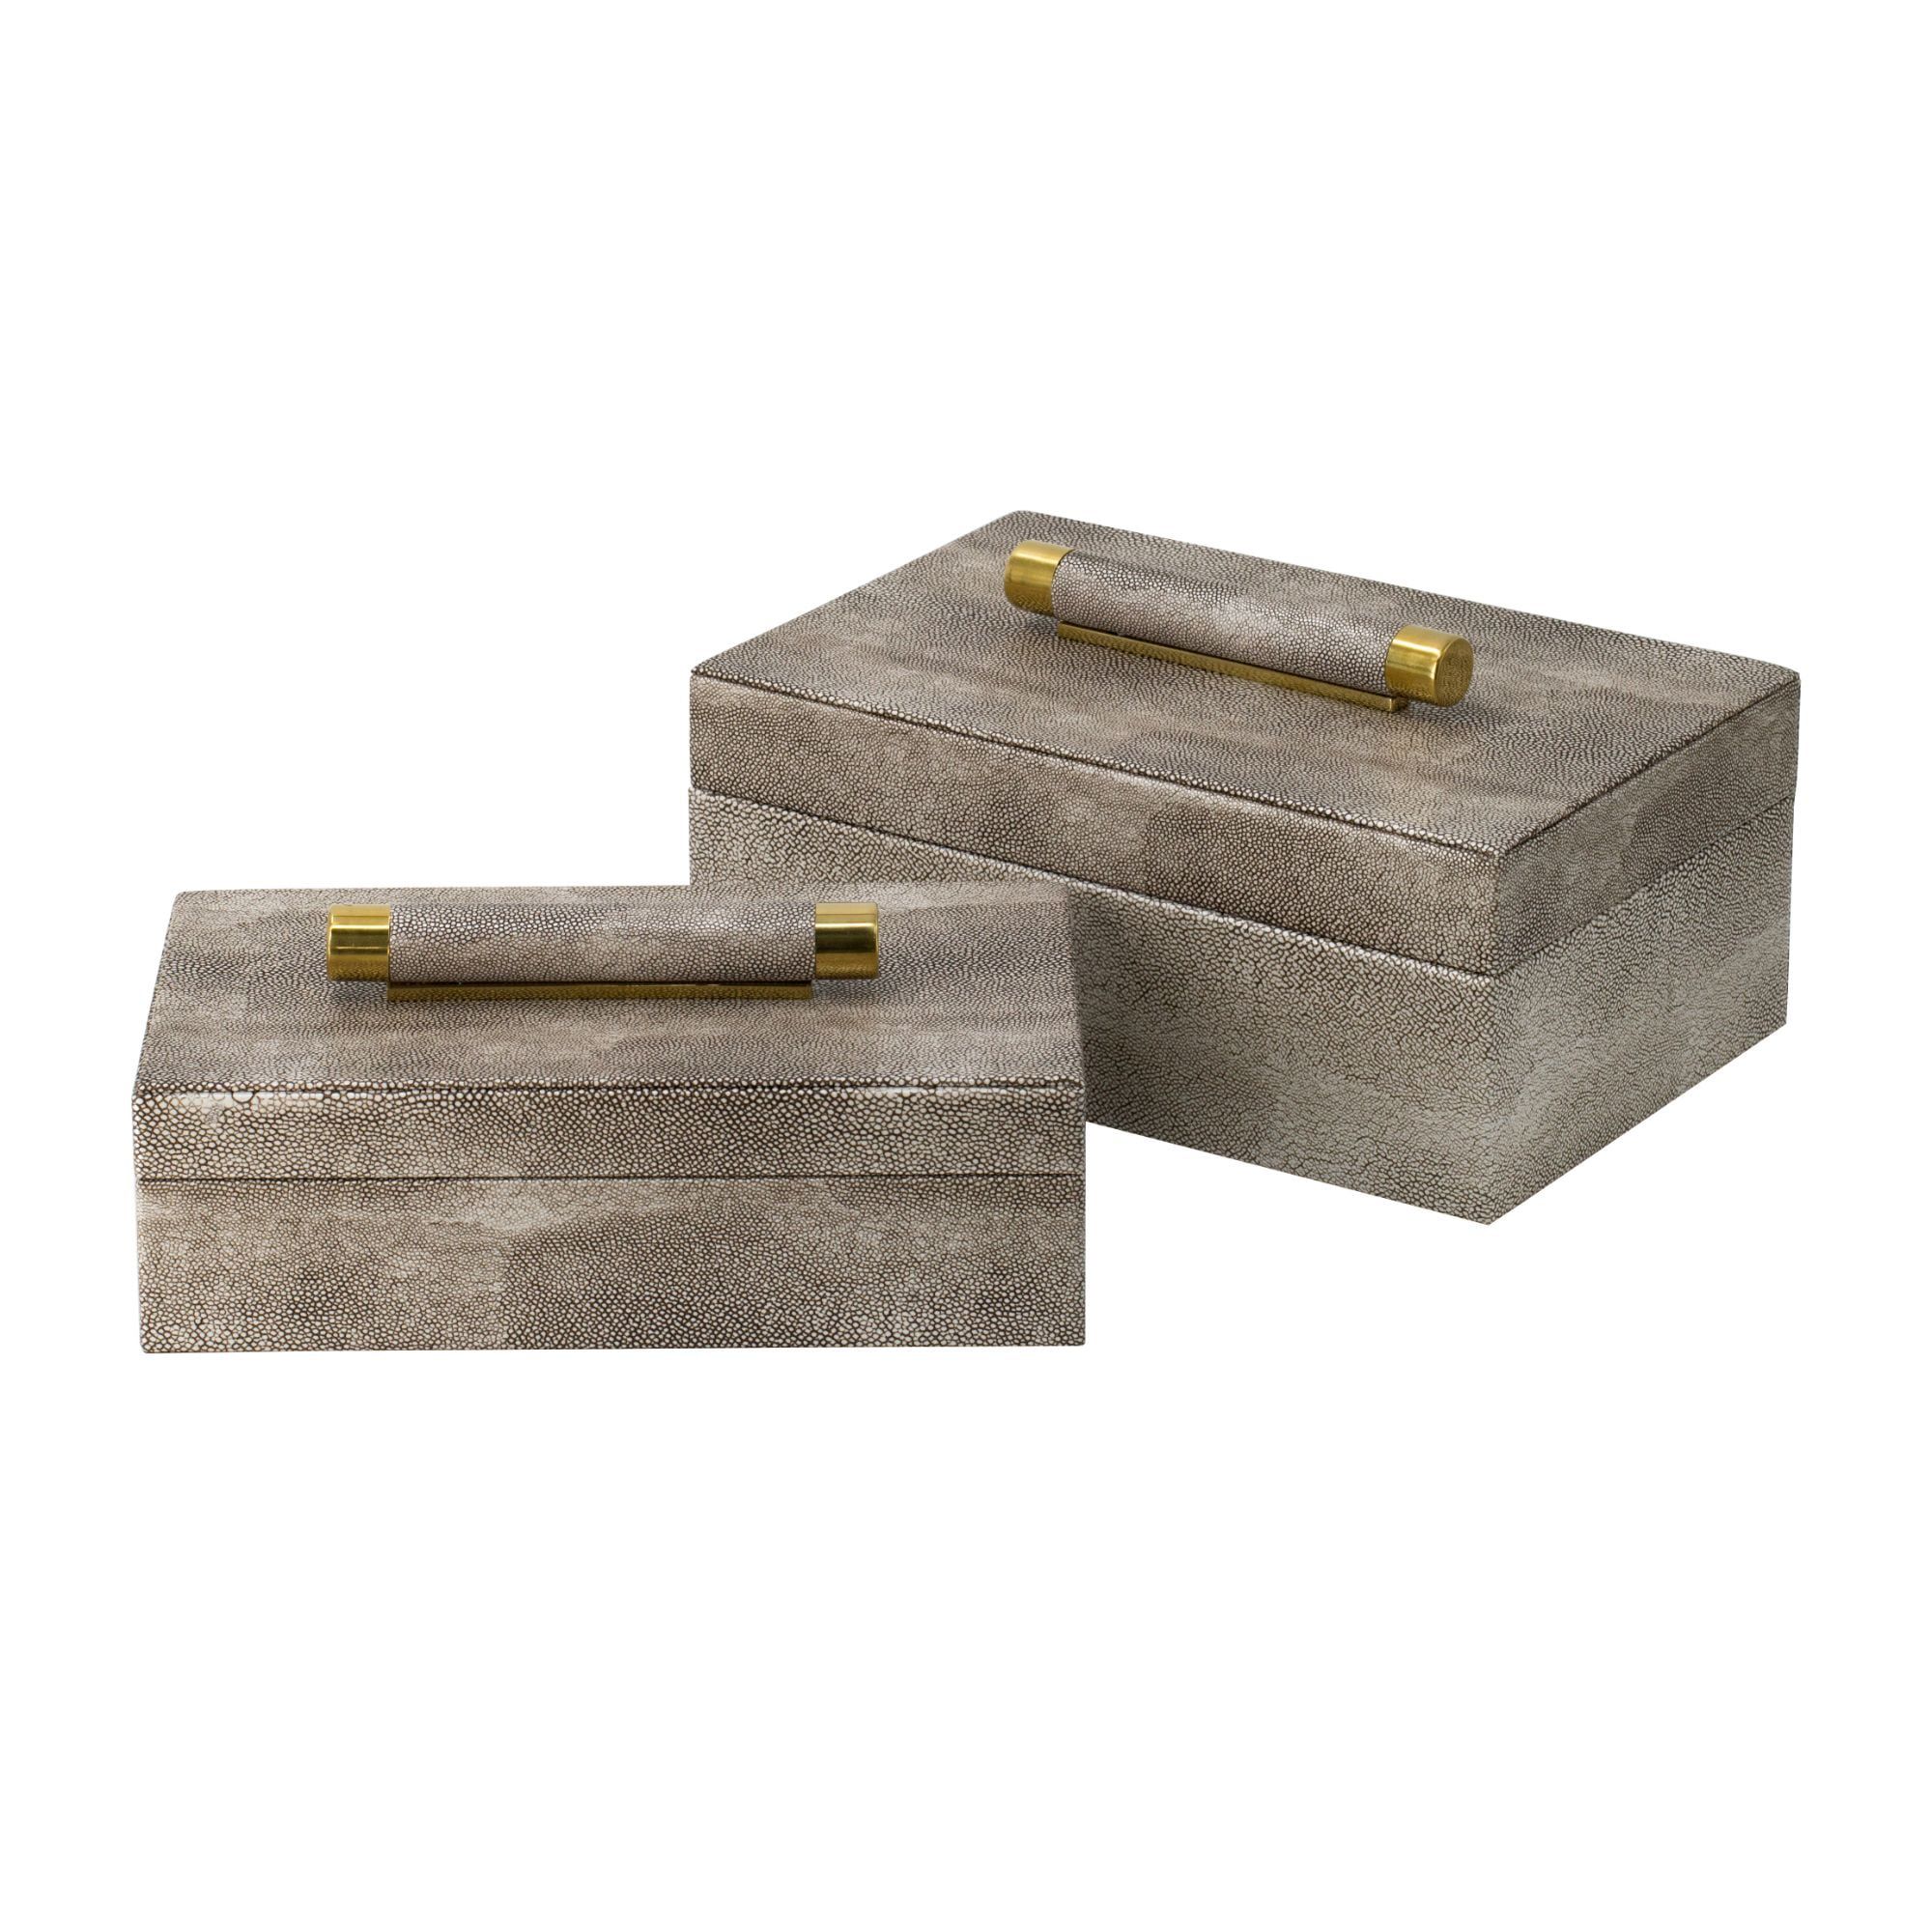 Set of 2 Brown Textured Contemporary Rectangular Boxes with Wrapped Handles 11" | Walmart (US)